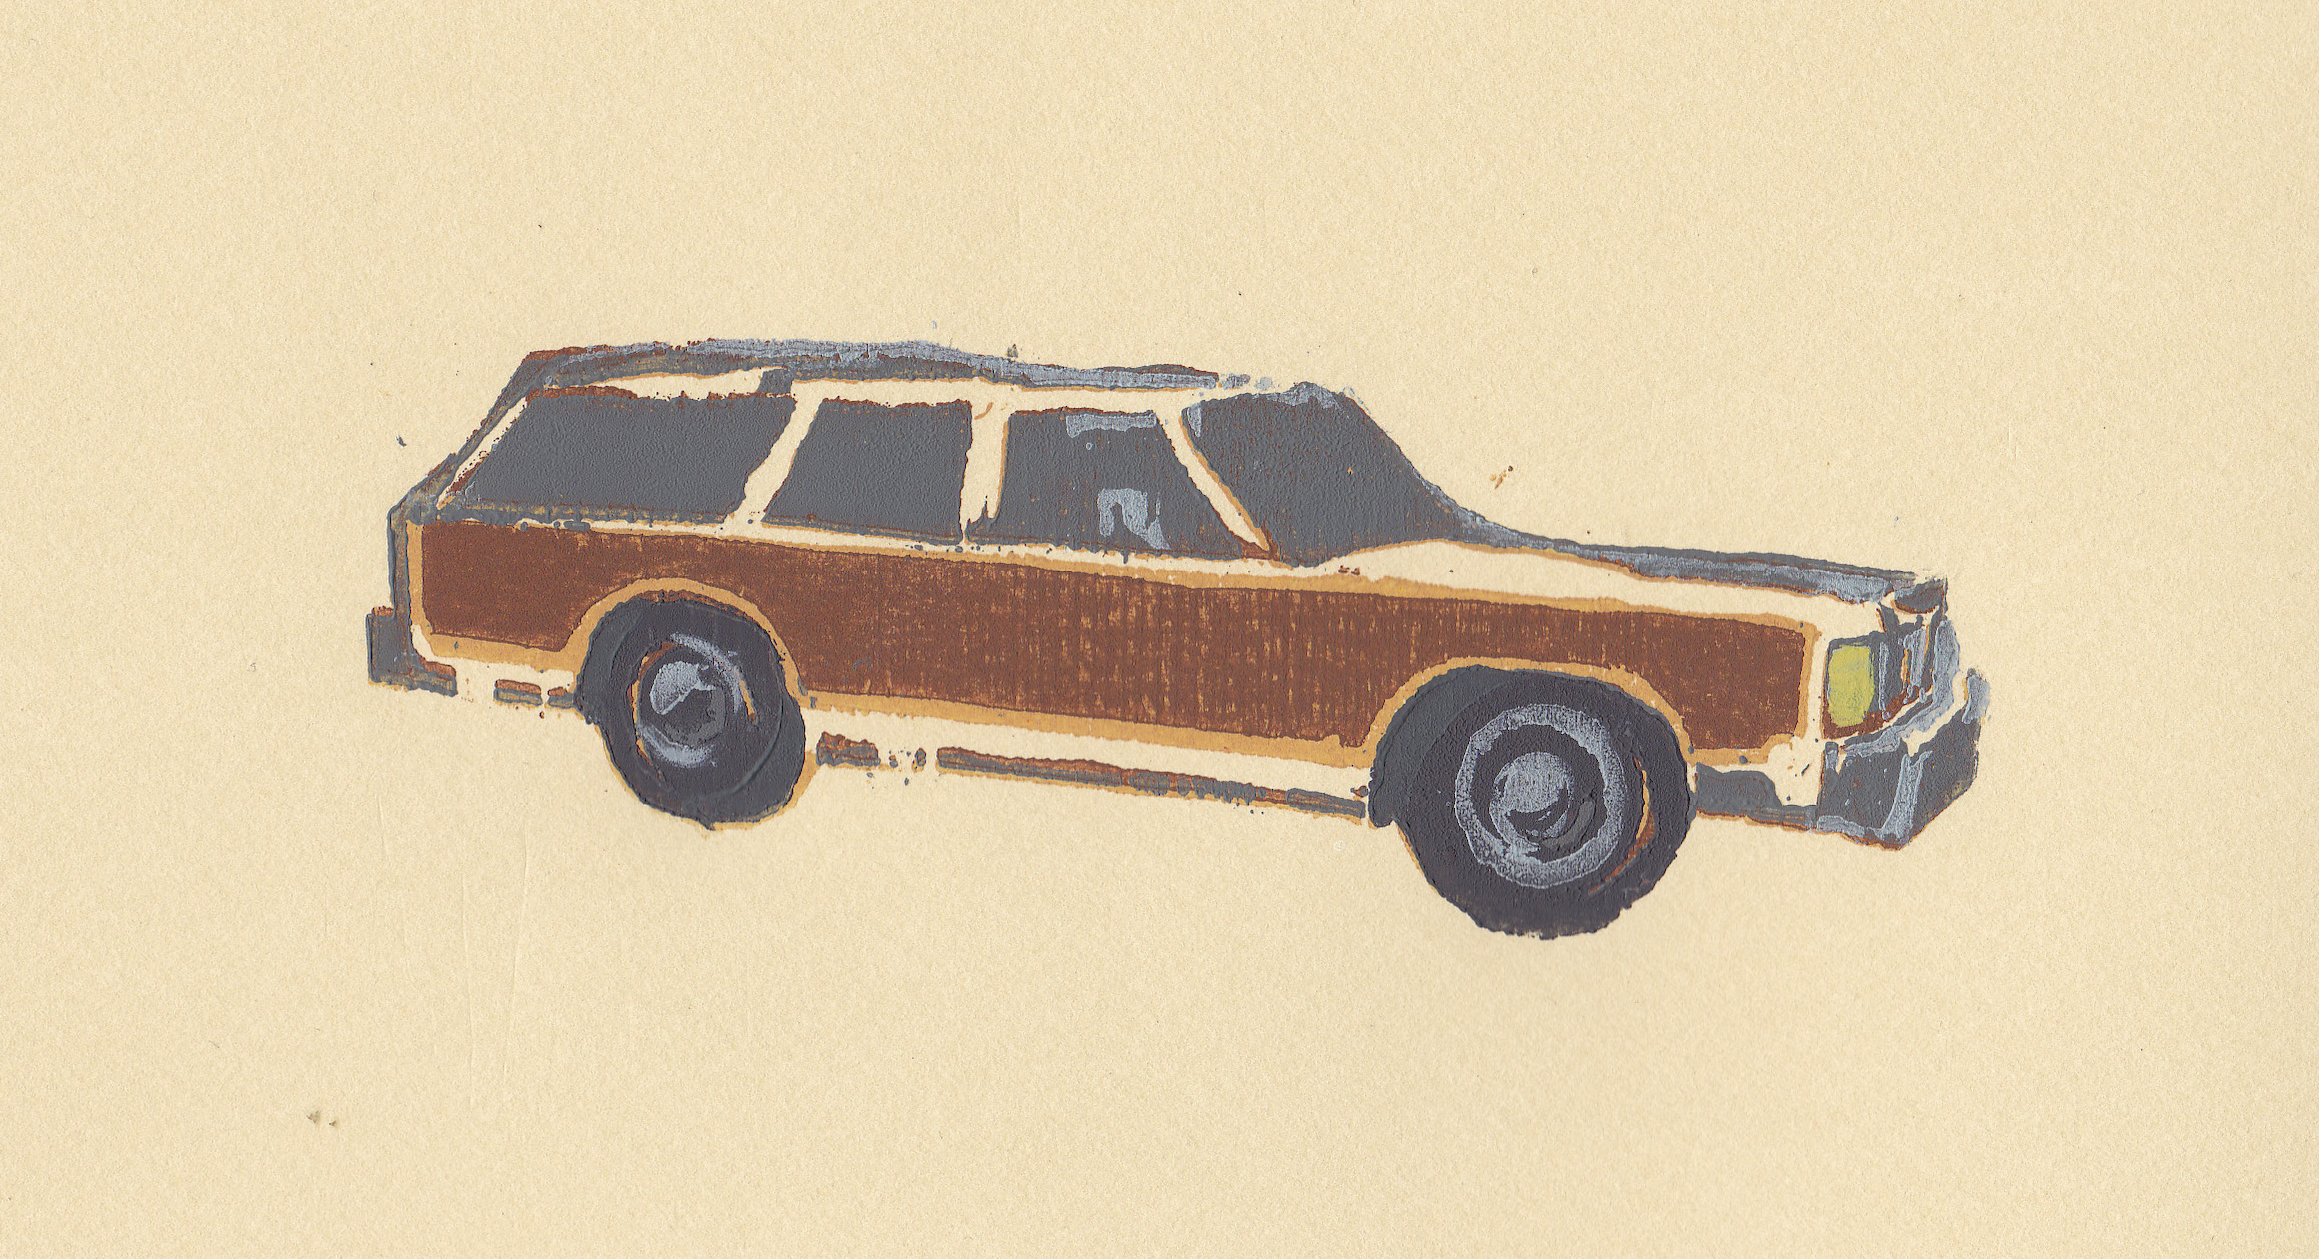   country squire  reductive woodblock print, edition of 6 4x6" 2011  edition sold out  purchase reproduction prints  